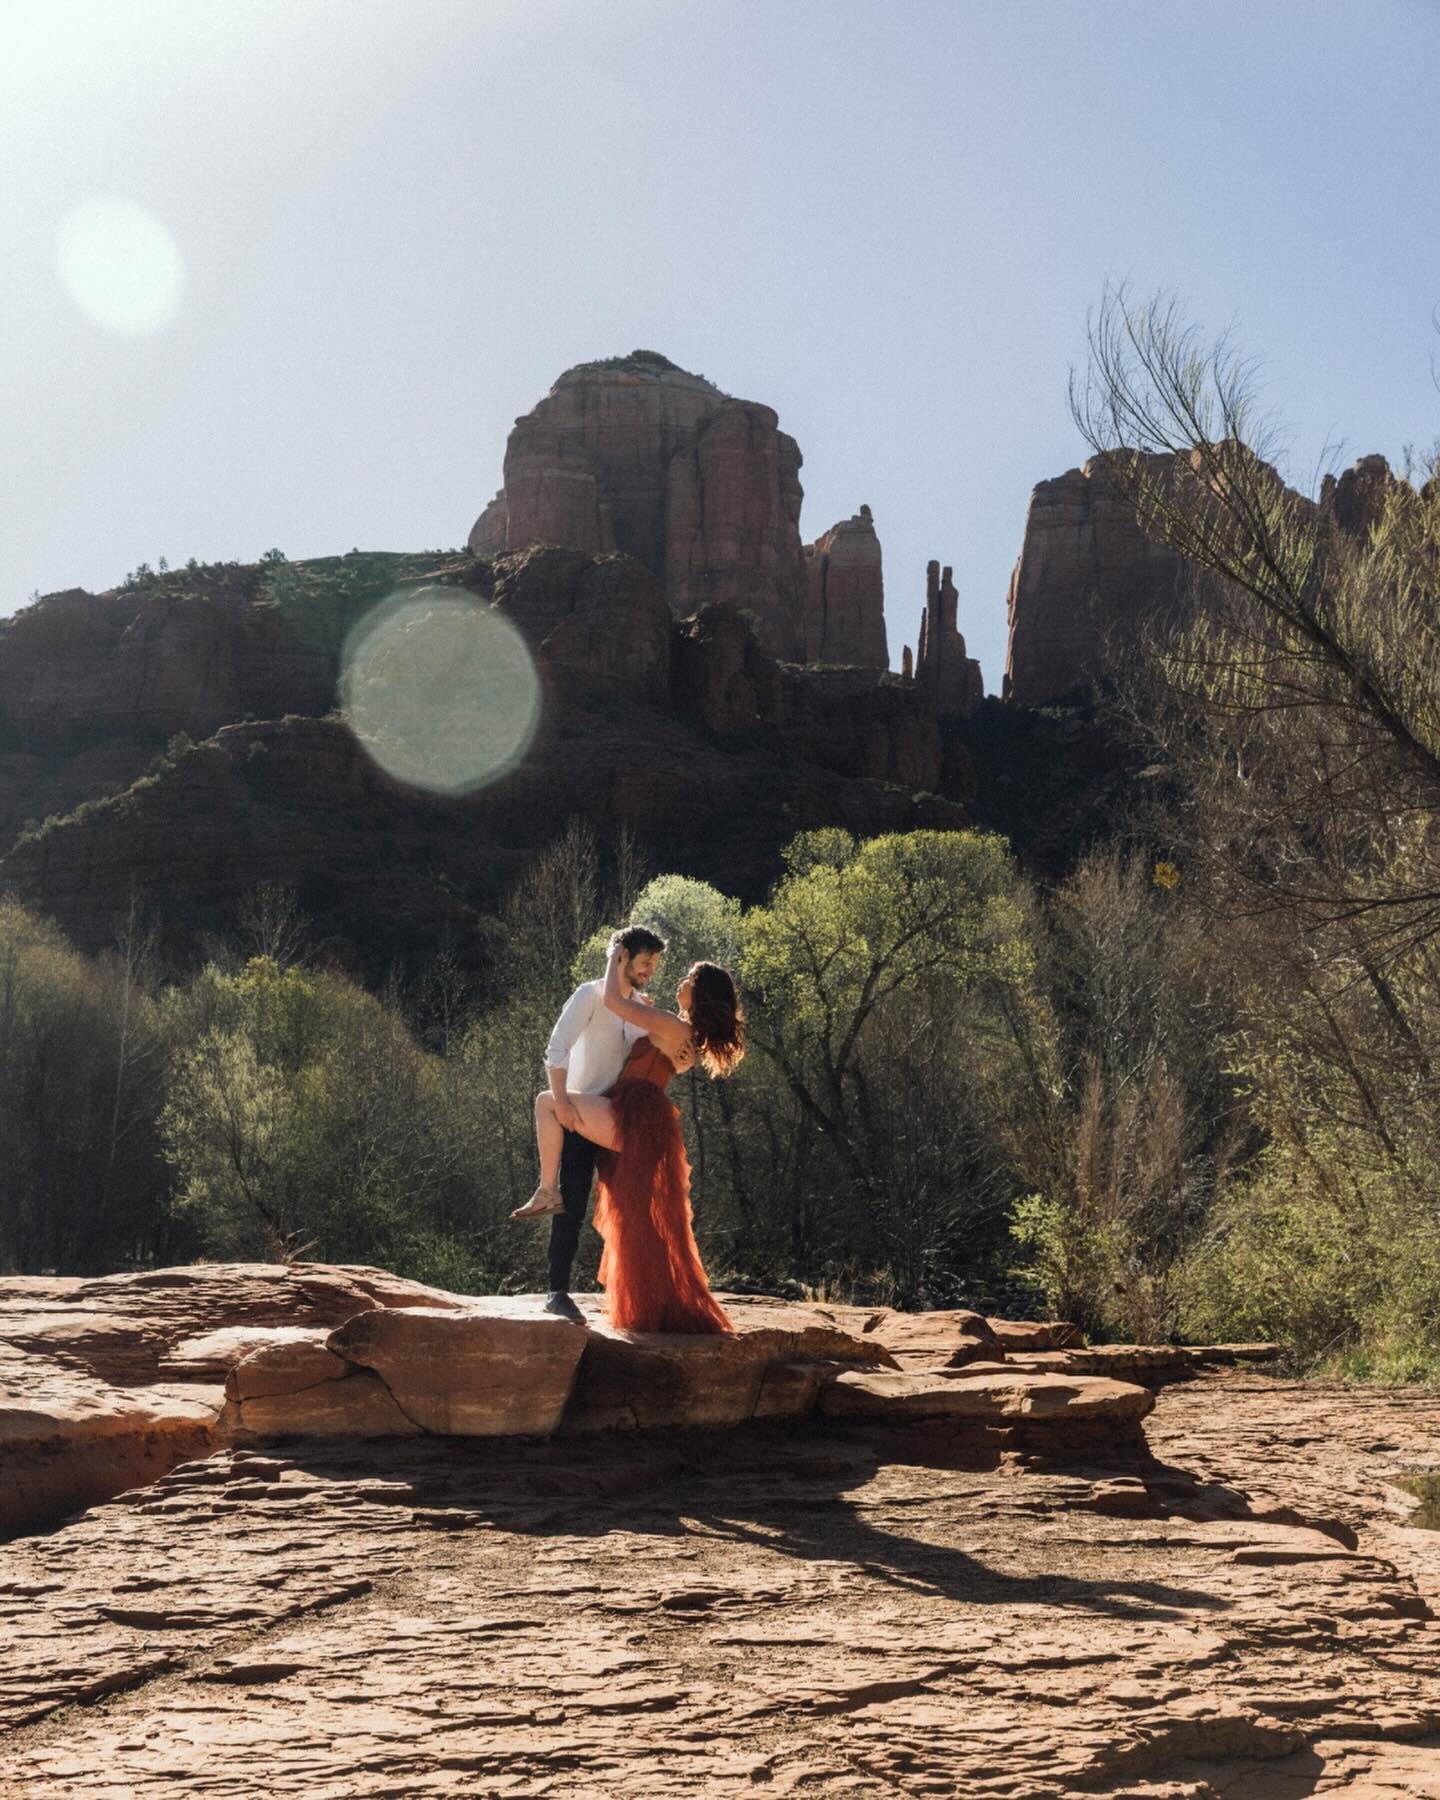 Capturing the essence of Mandy &amp; Simon&rsquo;s love story against the captivating backdrop of Sedona, their beloved sanctuary and favorite escape. From the warmth of their embraces to the sparkle in their eyes, every moment shared in this enchant